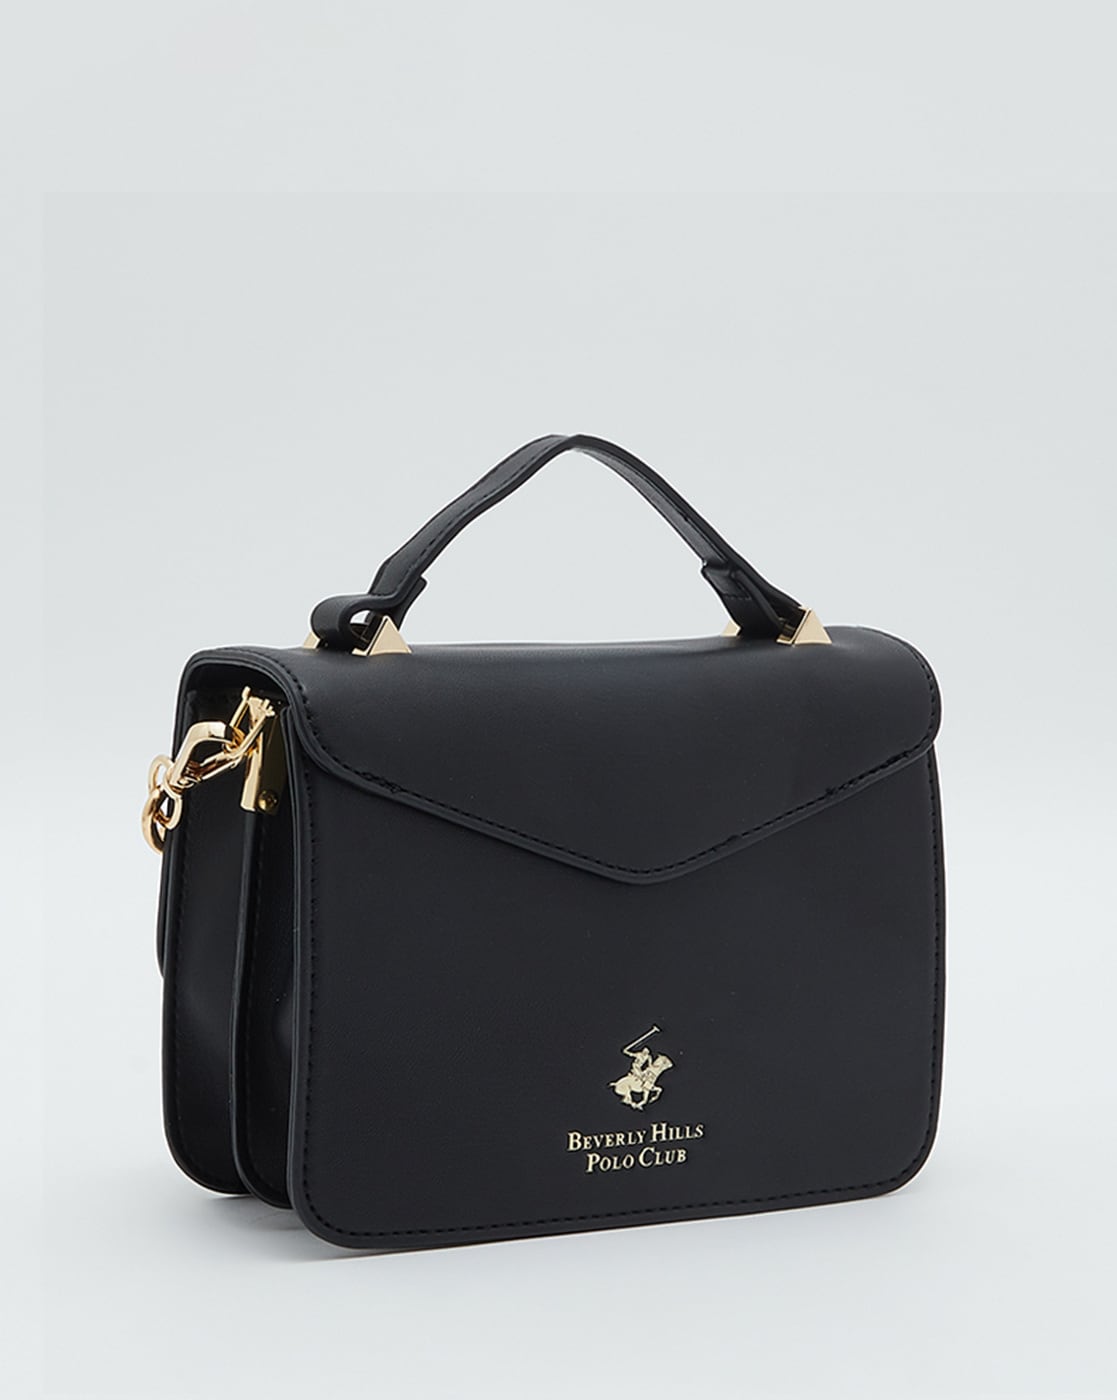 Shop BEVERLY HILLS POLO CLUB Totes by ブランド・ゲート | BUYMA